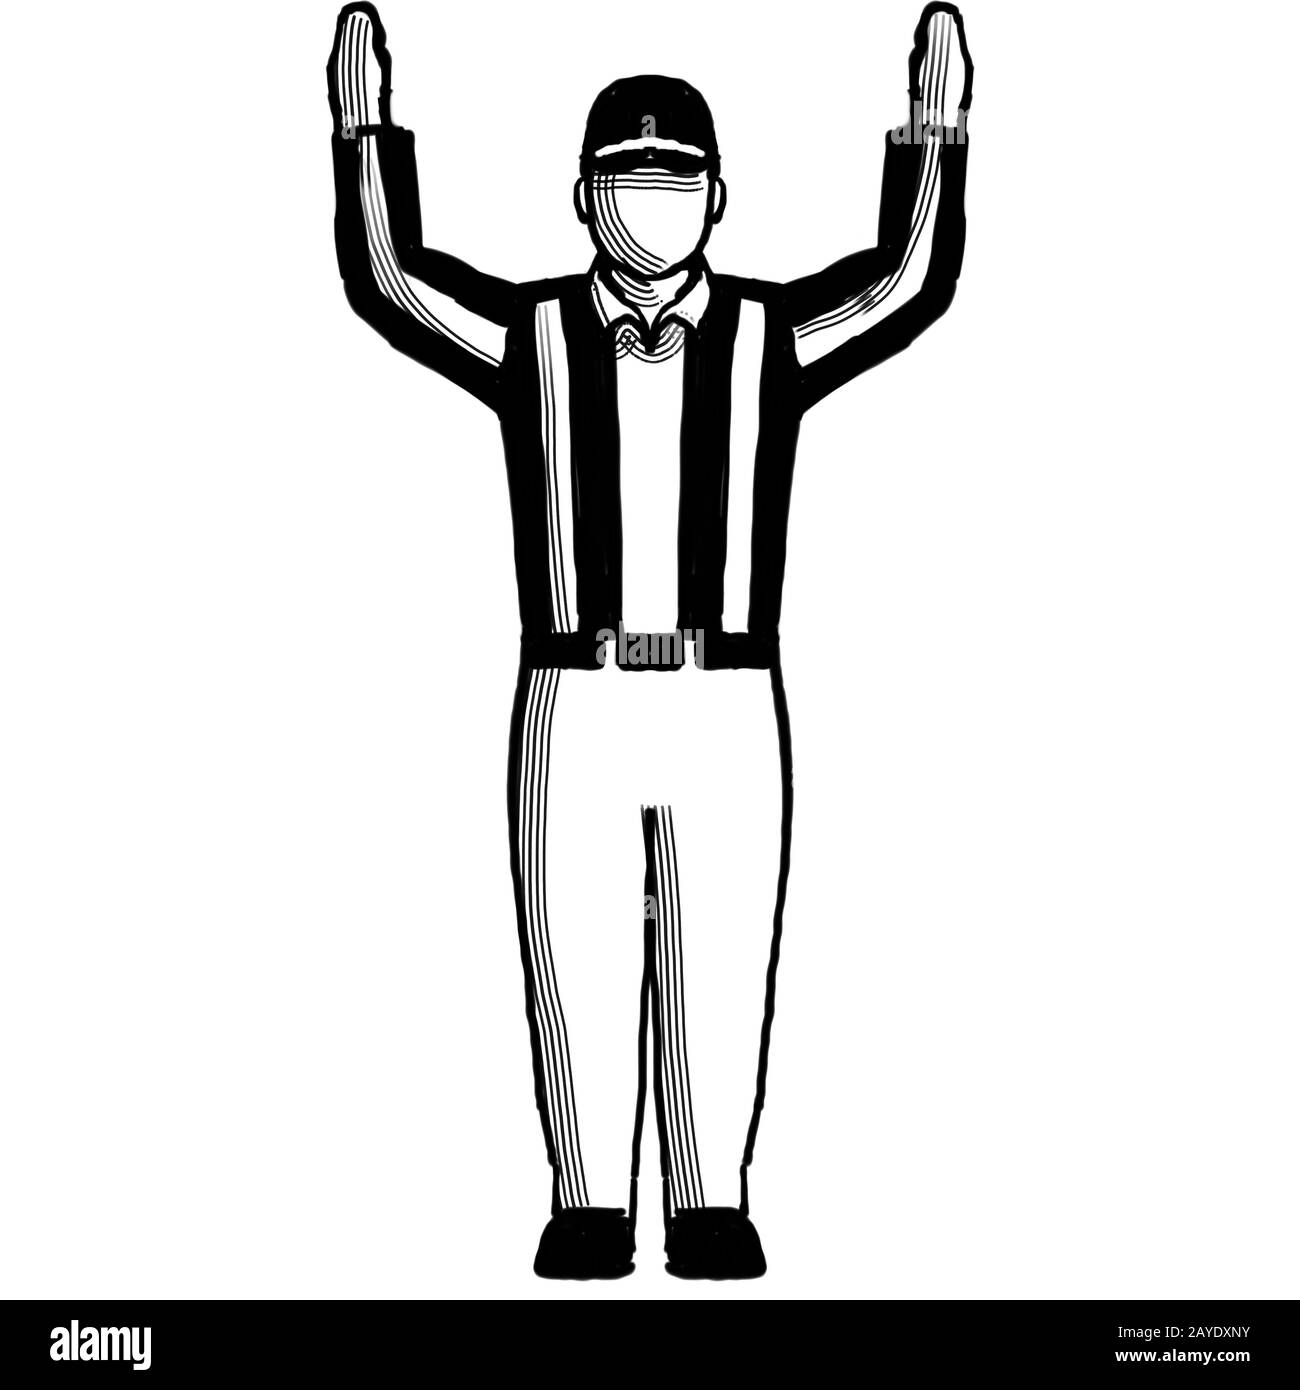 American Football Official touchdown sign Hand Signal Retro Stock Photo